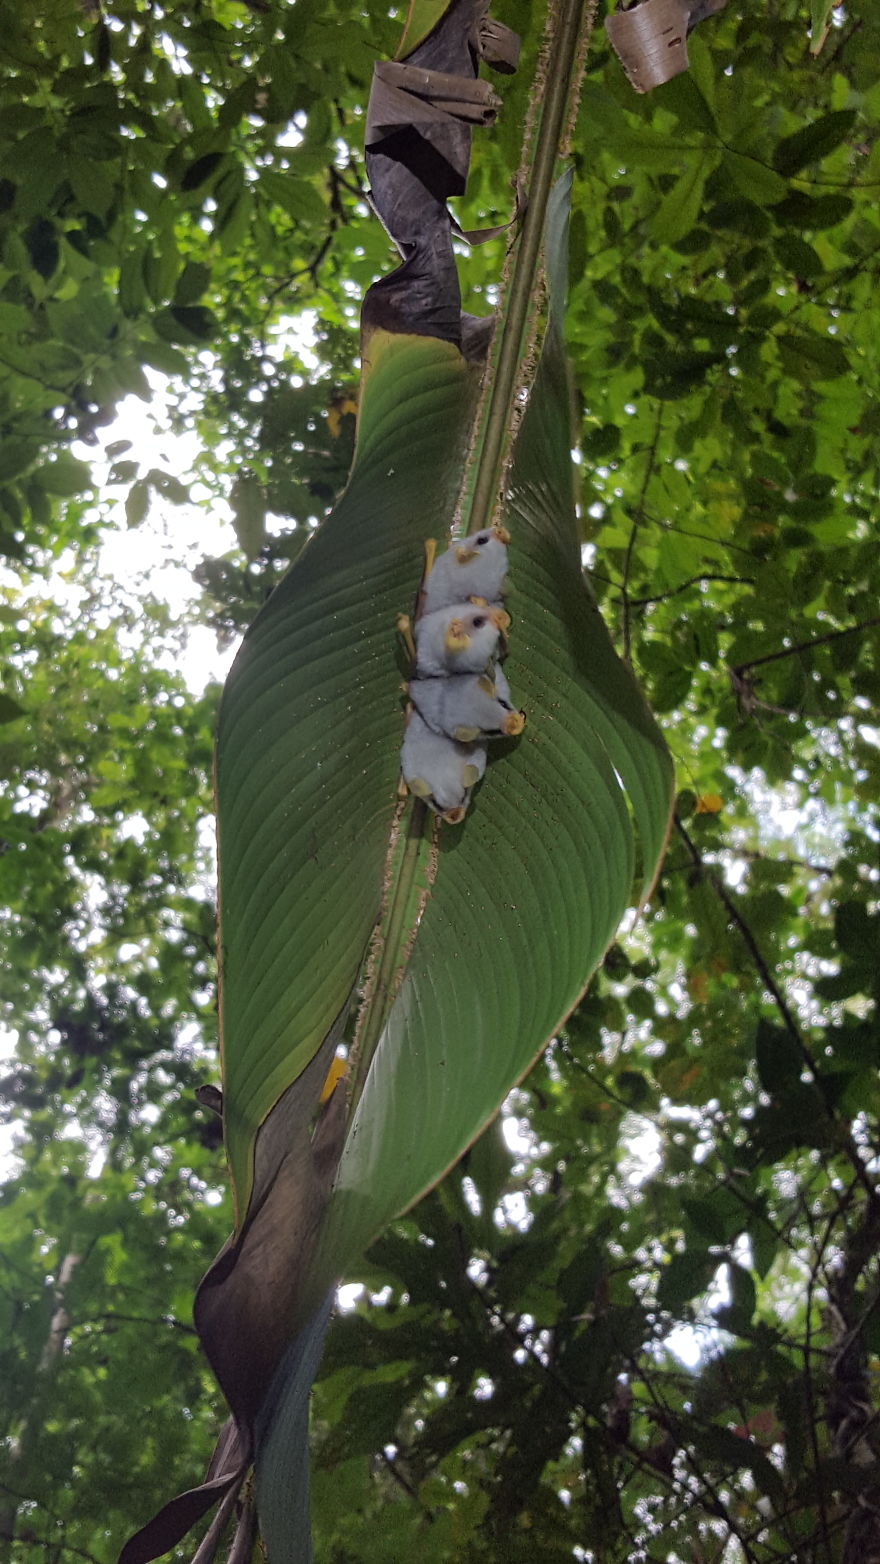 I Traveled To The Costa Rican Rainforest And Photographed Honduran White Bats (5 Pics)